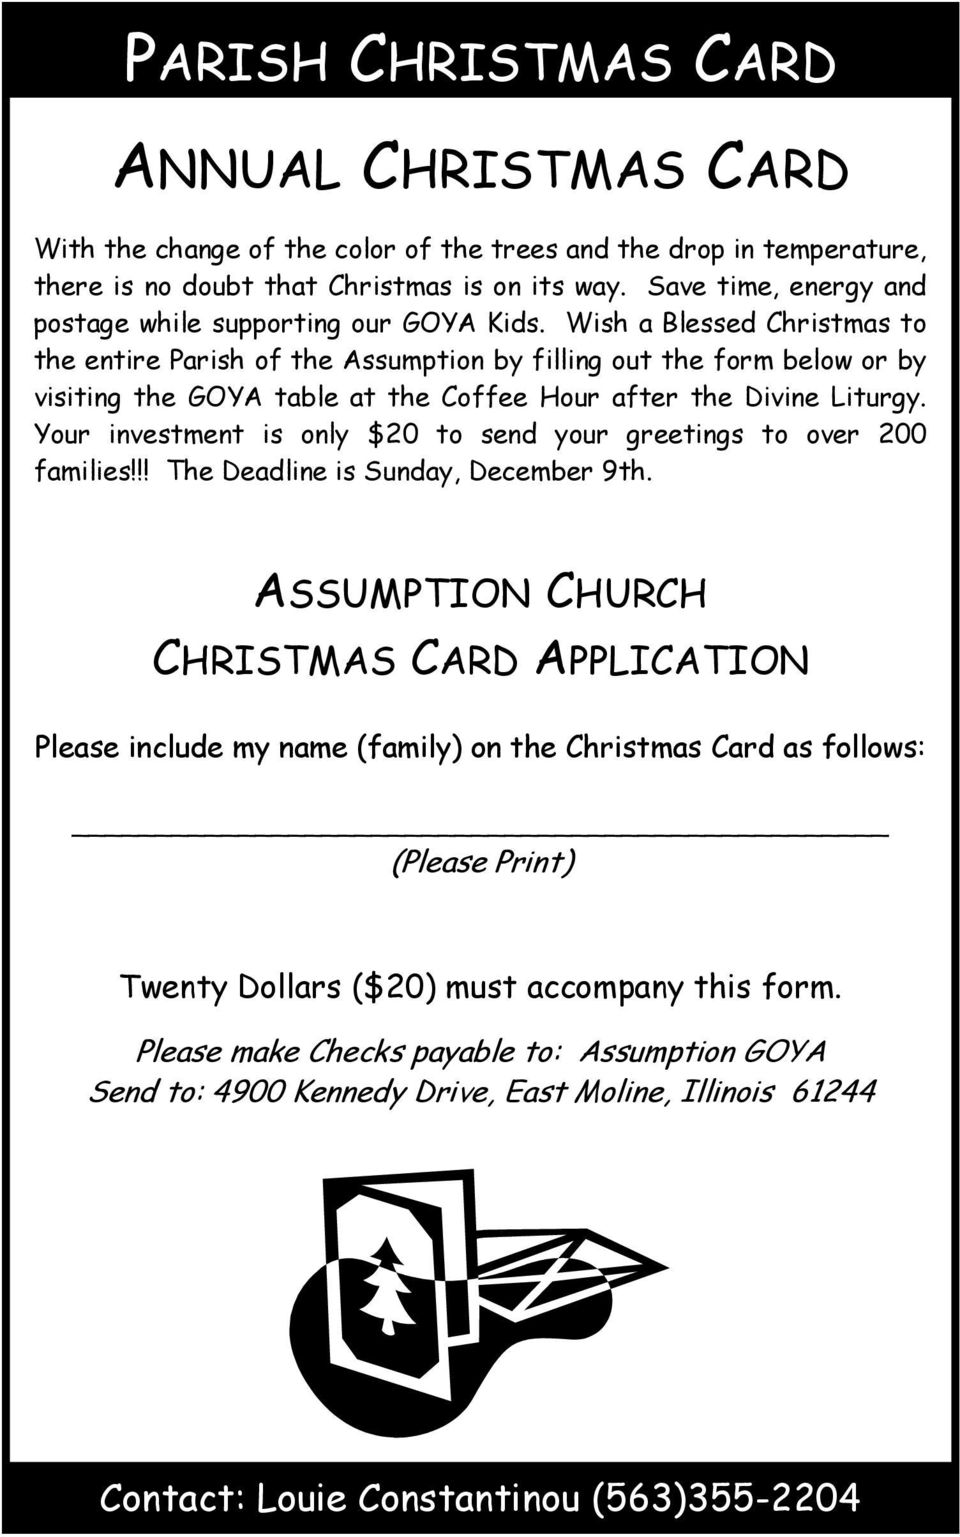 Wish a Blessed Christmas to the entire Parish of the Assumption by filling out the form below or by visiting the GOYA table at the Coffee Hour after the Divine Liturgy.